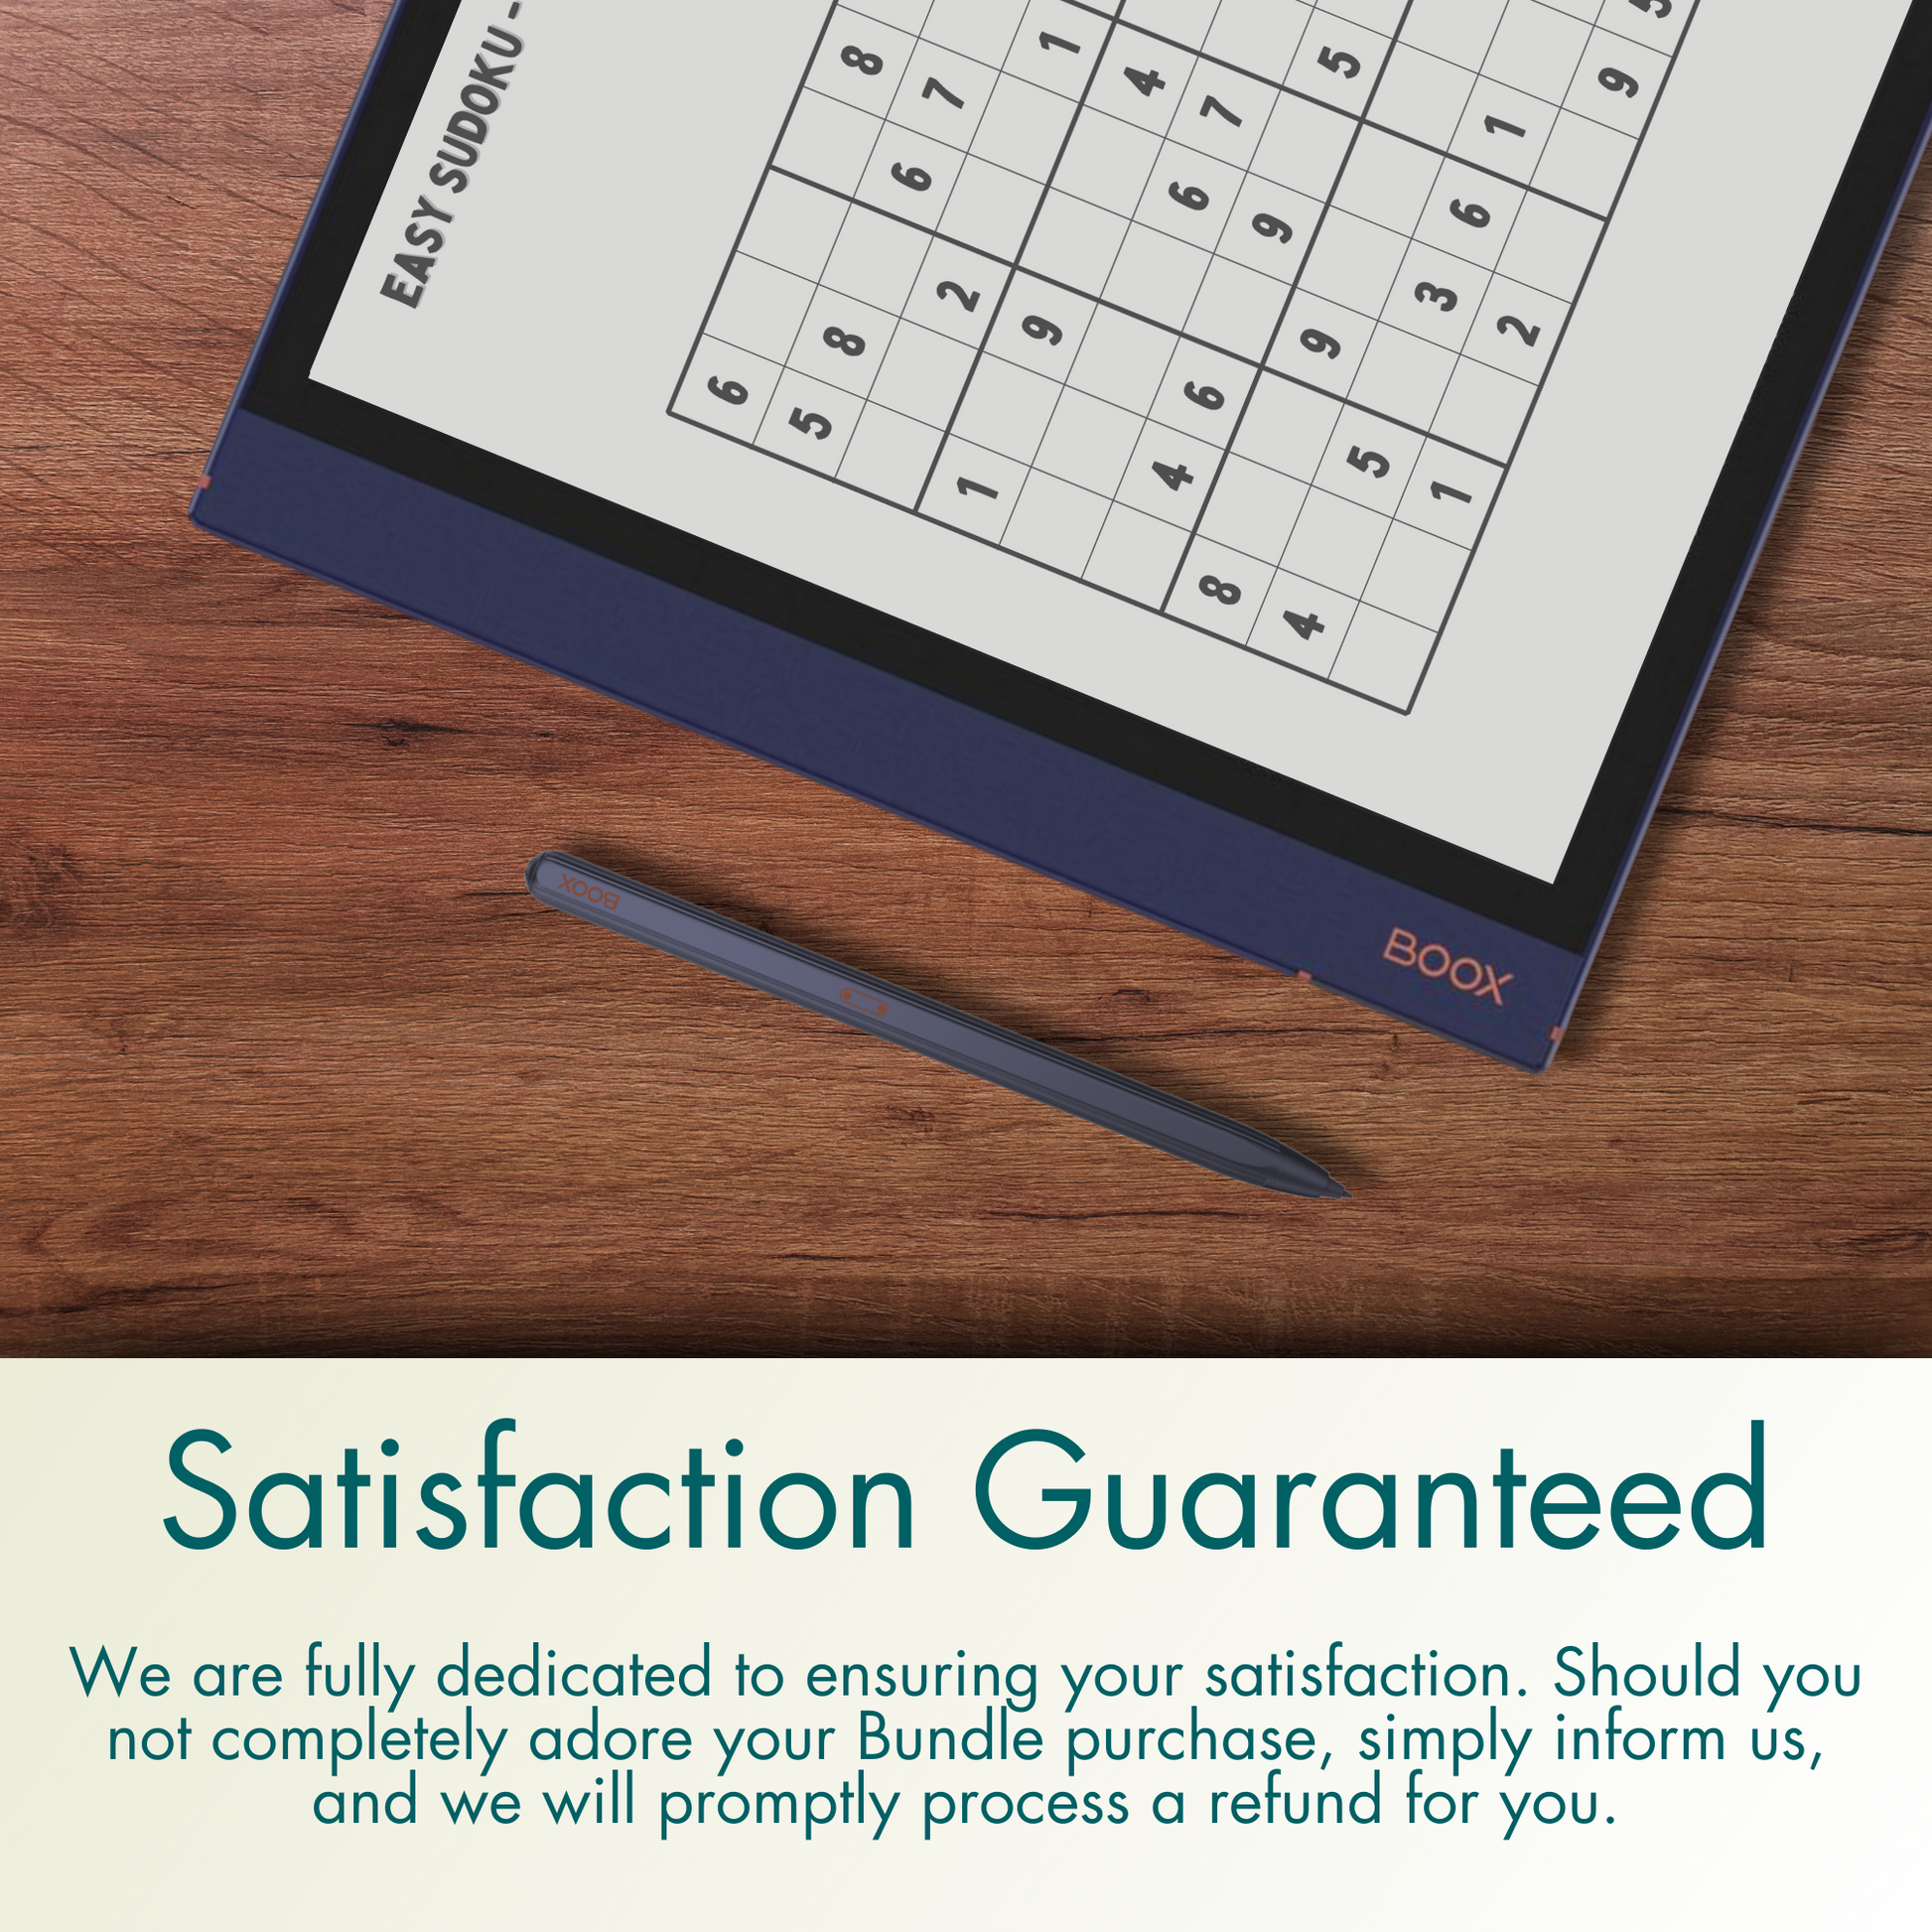 We are fully dedicated to ensuring your satisfaction. Should you not completely adore your purchase, simply inform us, and we will promptly process a refund for you.